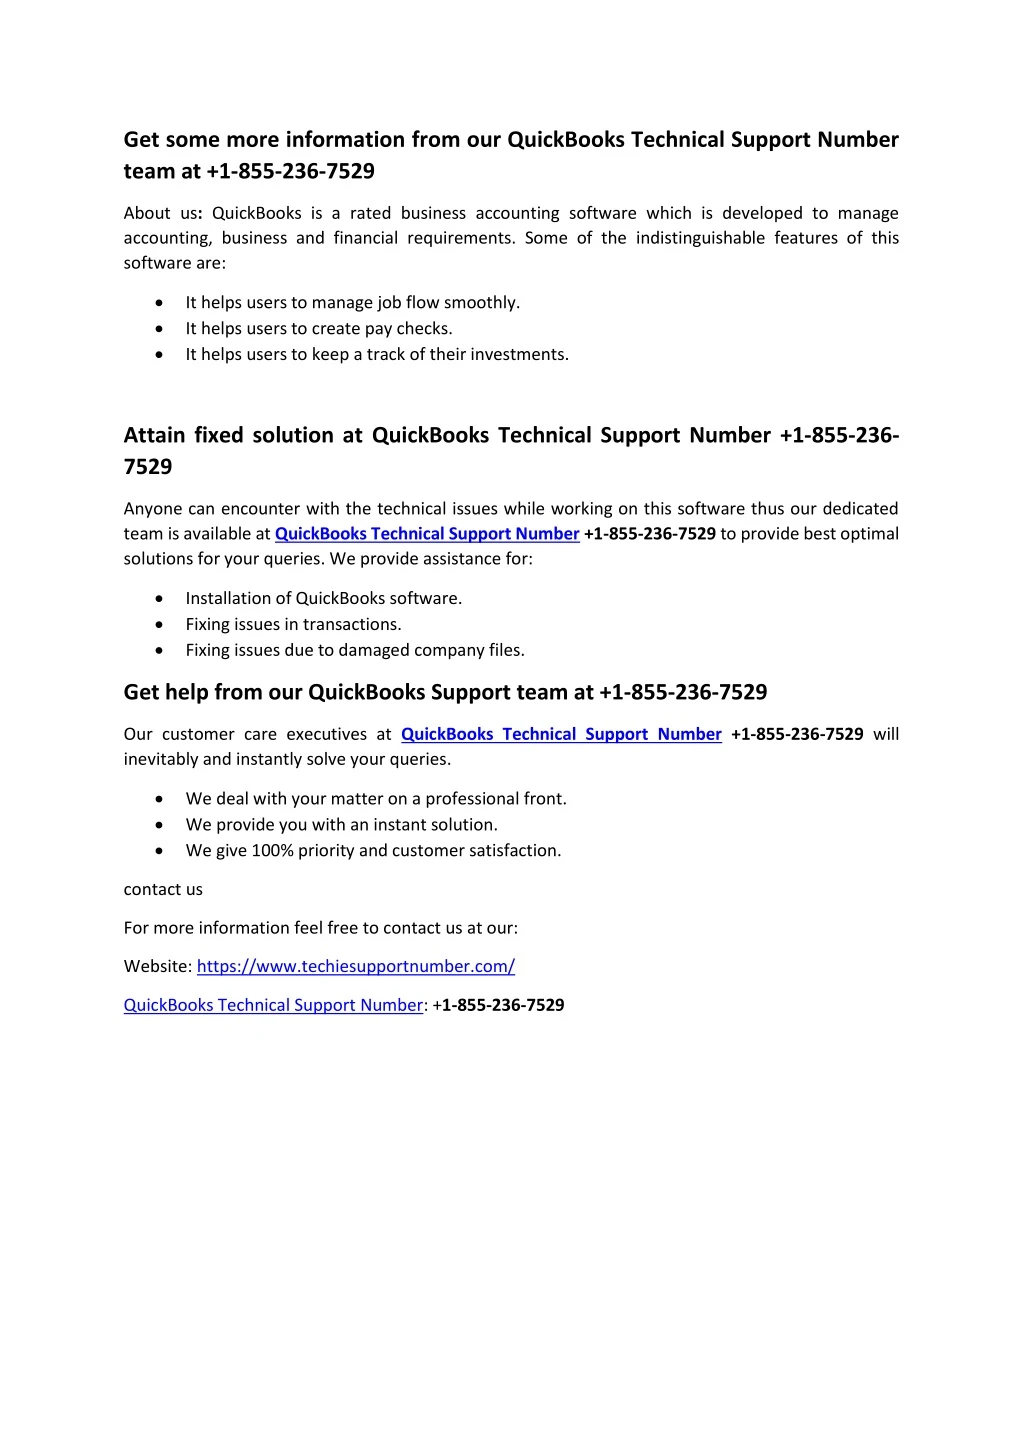 get some more information from our quickbooks